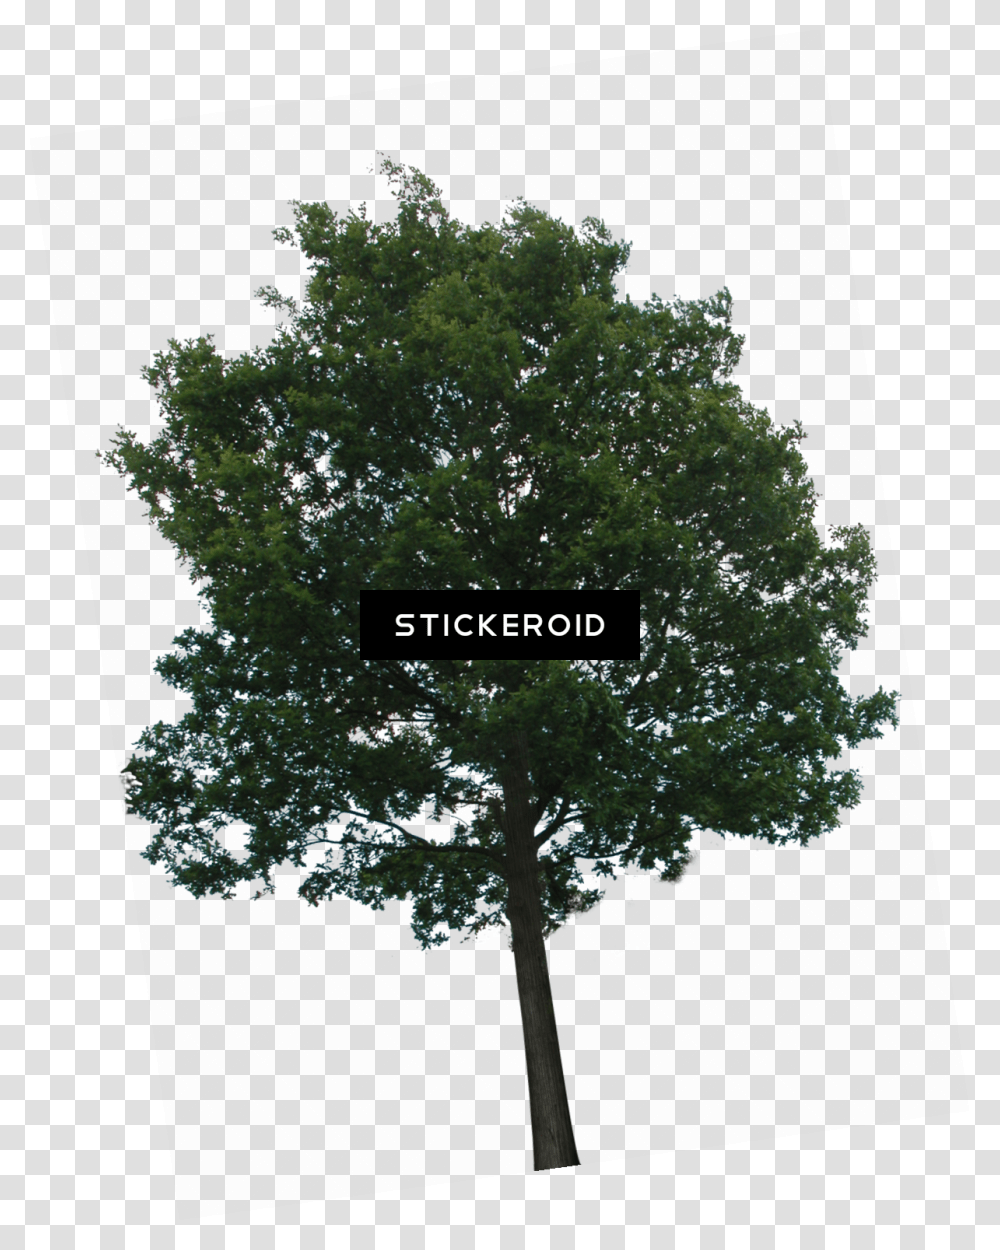 Trees No Background Download Tree With Transparency, Plant, Oak, Sycamore, Cross Transparent Png